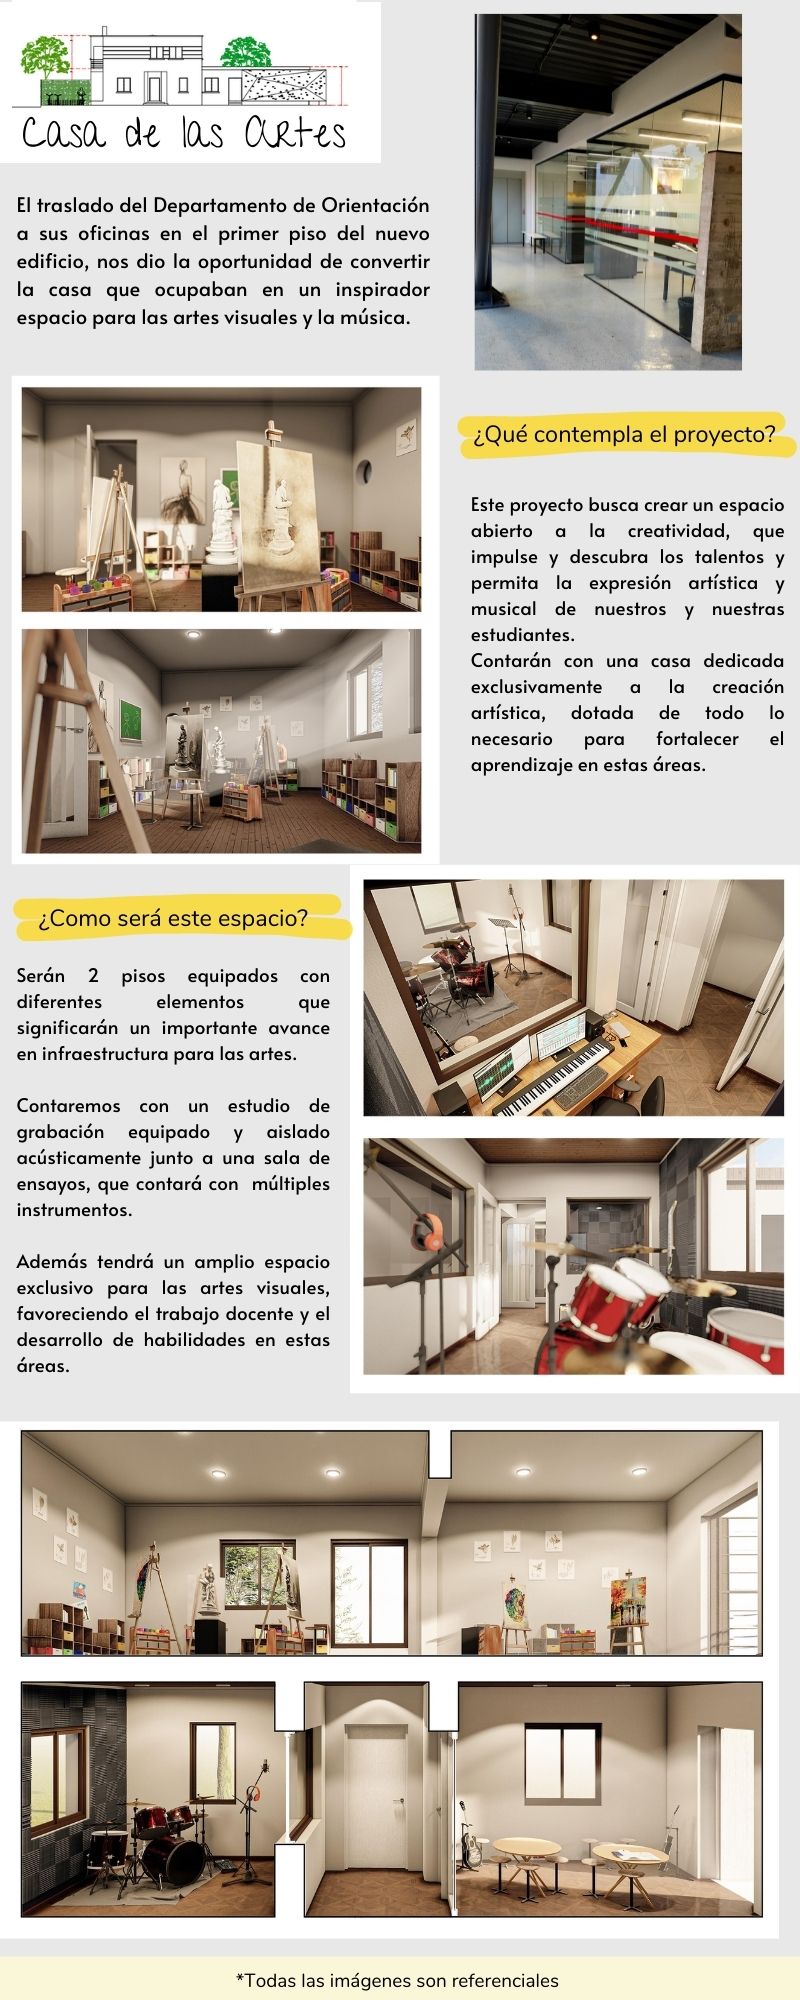 Proyecto Patio pag 2 referencial